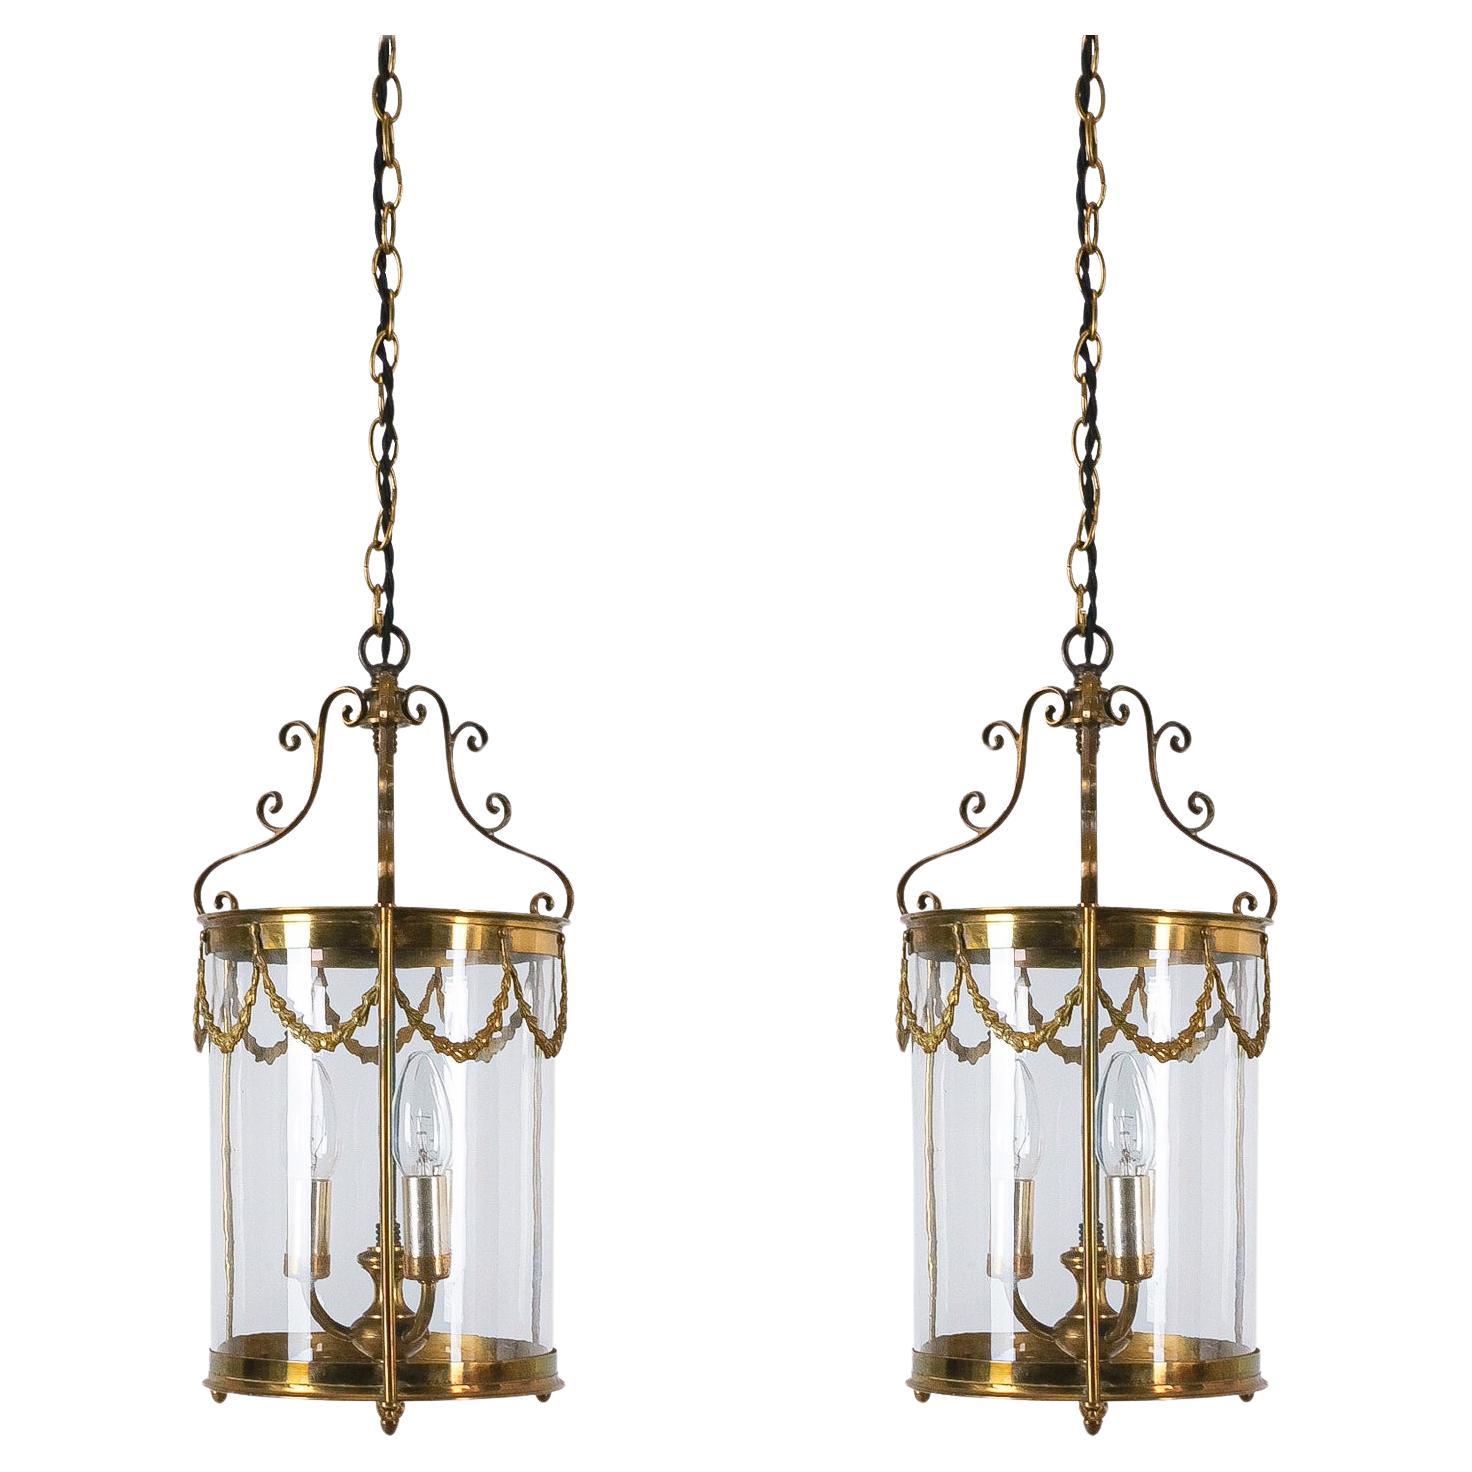 Pair of Neo-Empire Pendant Lights from Glass and Brass, France 1950